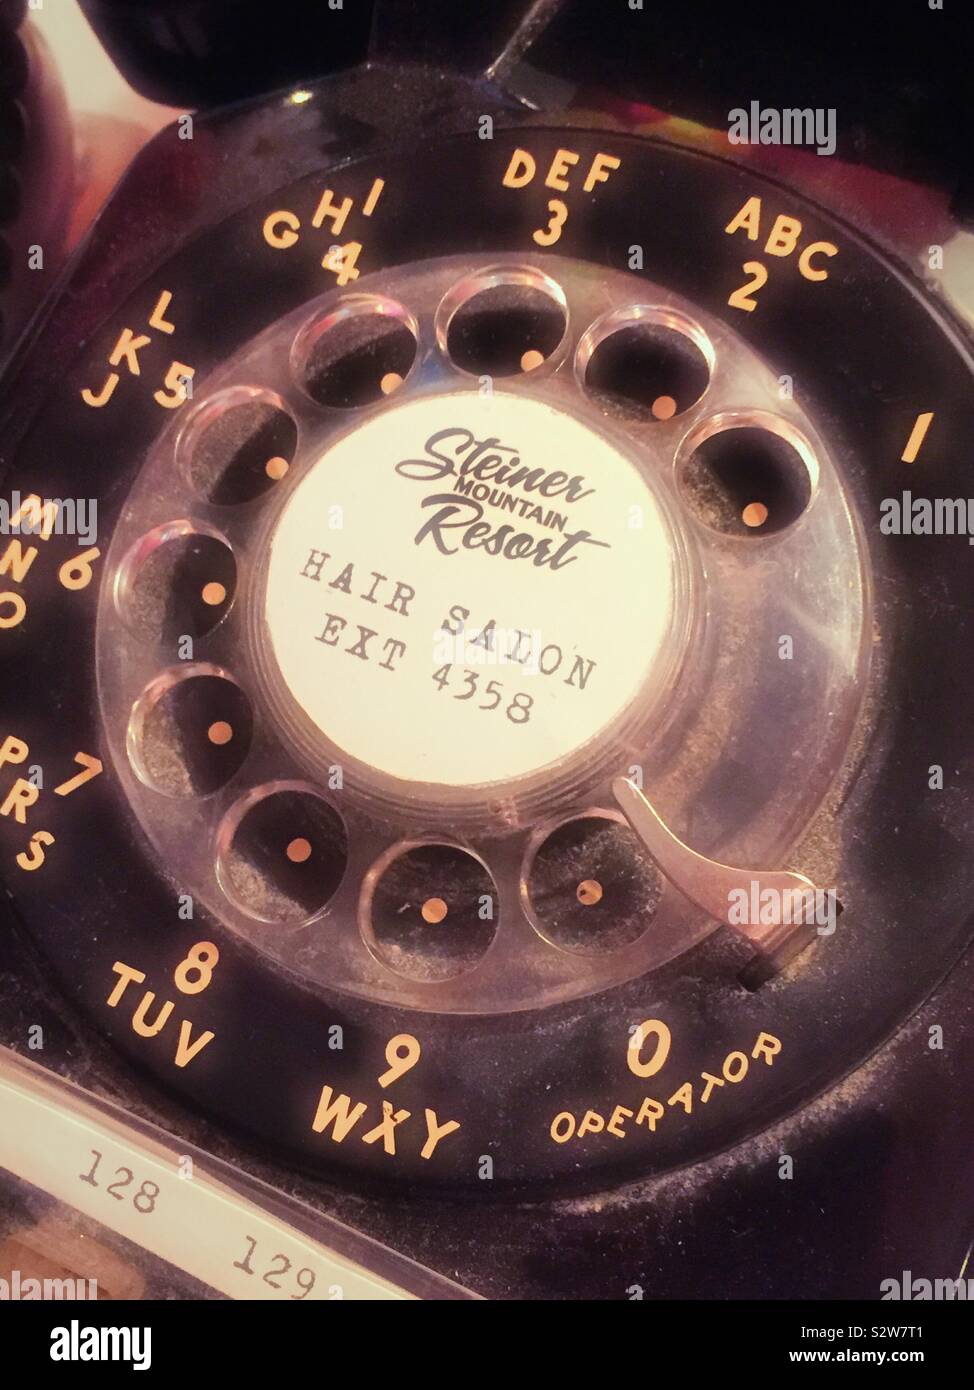 Rotary telephone dial from the Amazon prime television show the marvelous Mrs. Maisel, USA Stock Photo